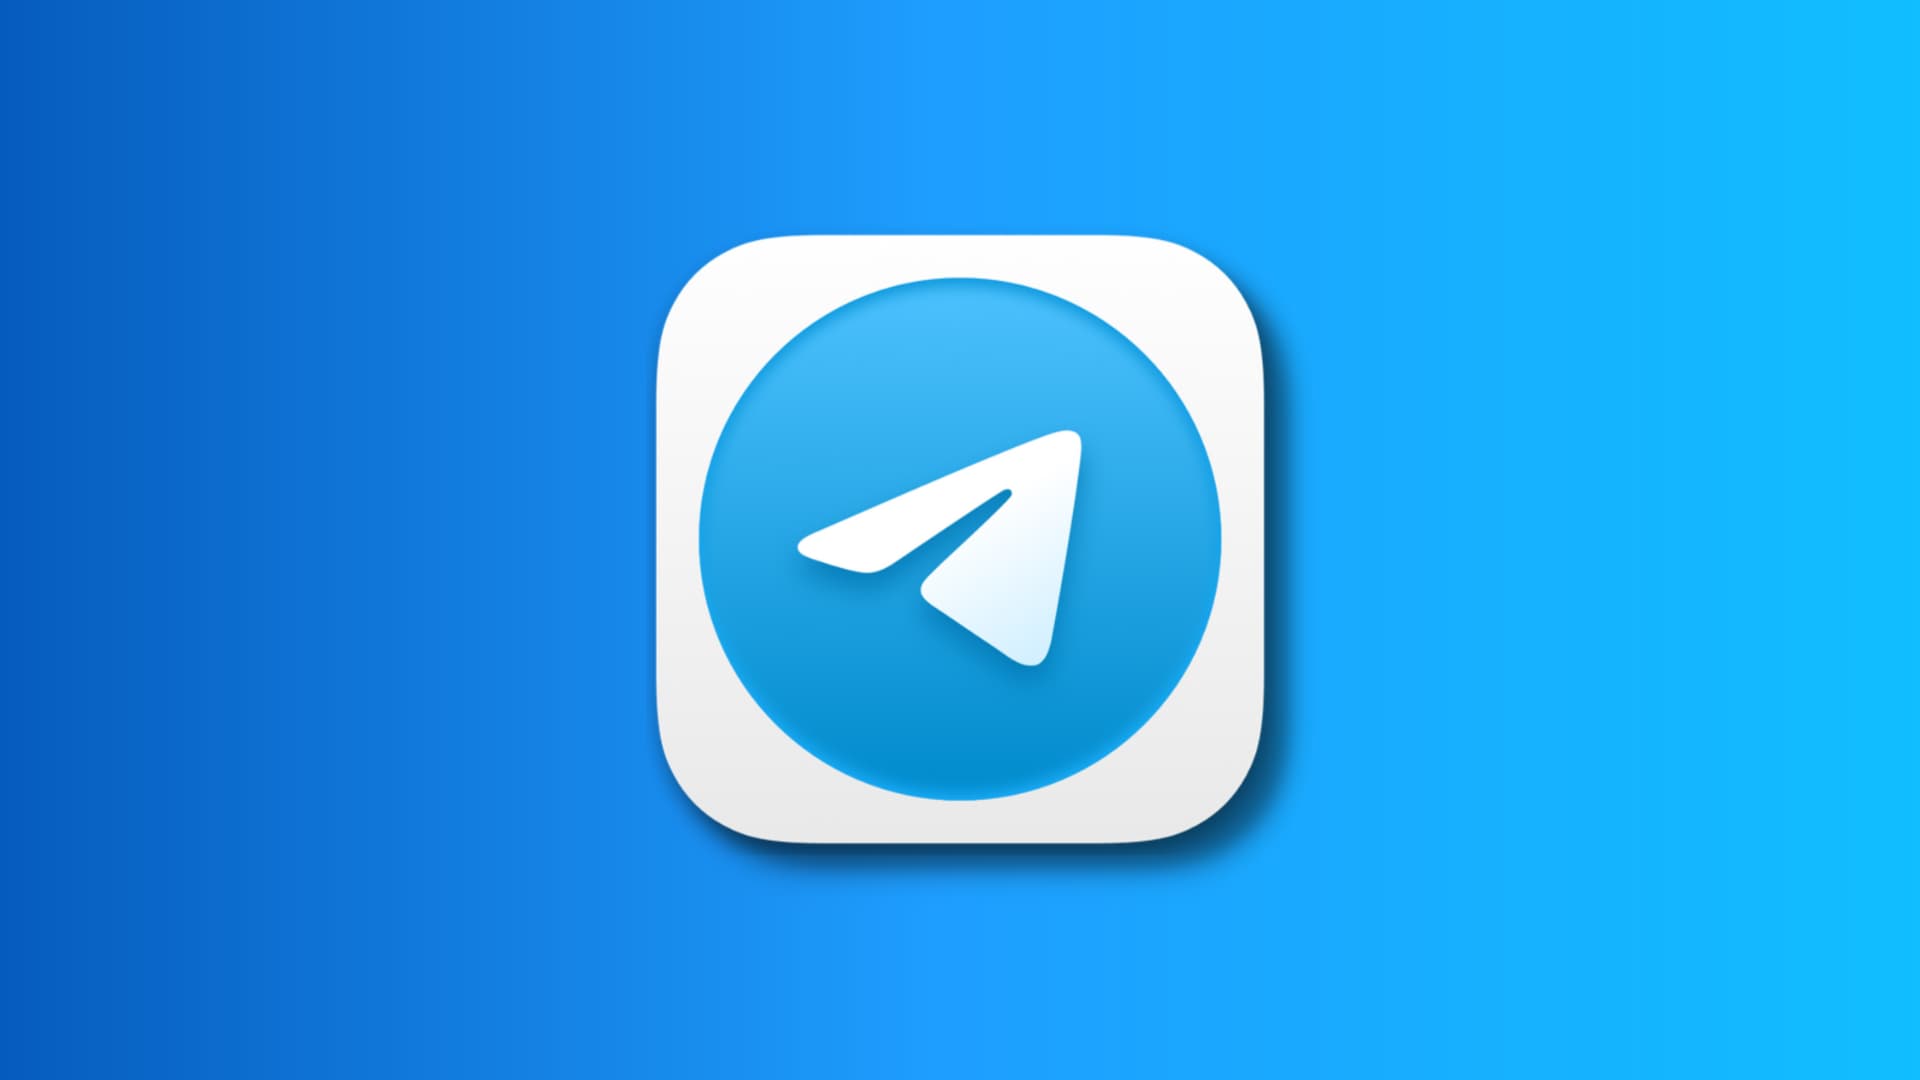 How to stop “Contact Joined Telegram” notifications on iPhone and Android